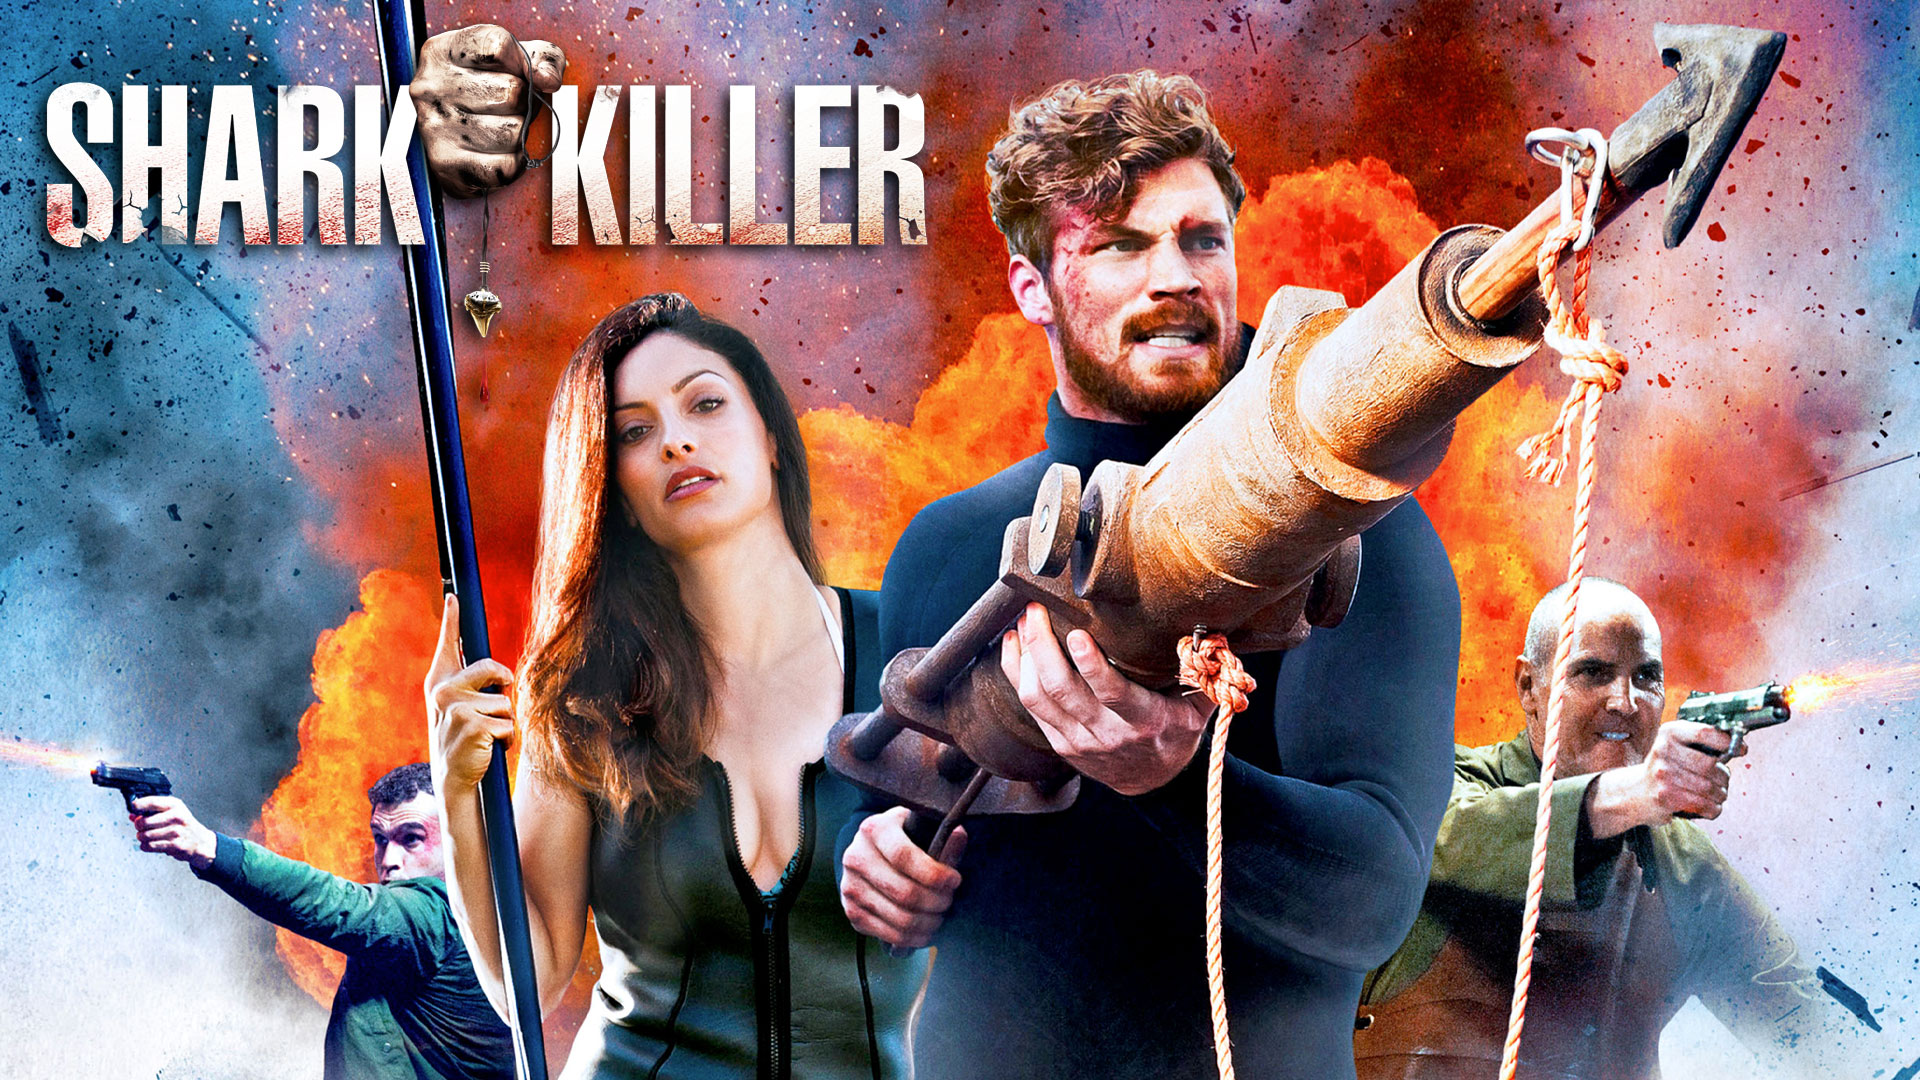 Shark Killer (2015) is here to take a big, juicy bite out of your movie night!